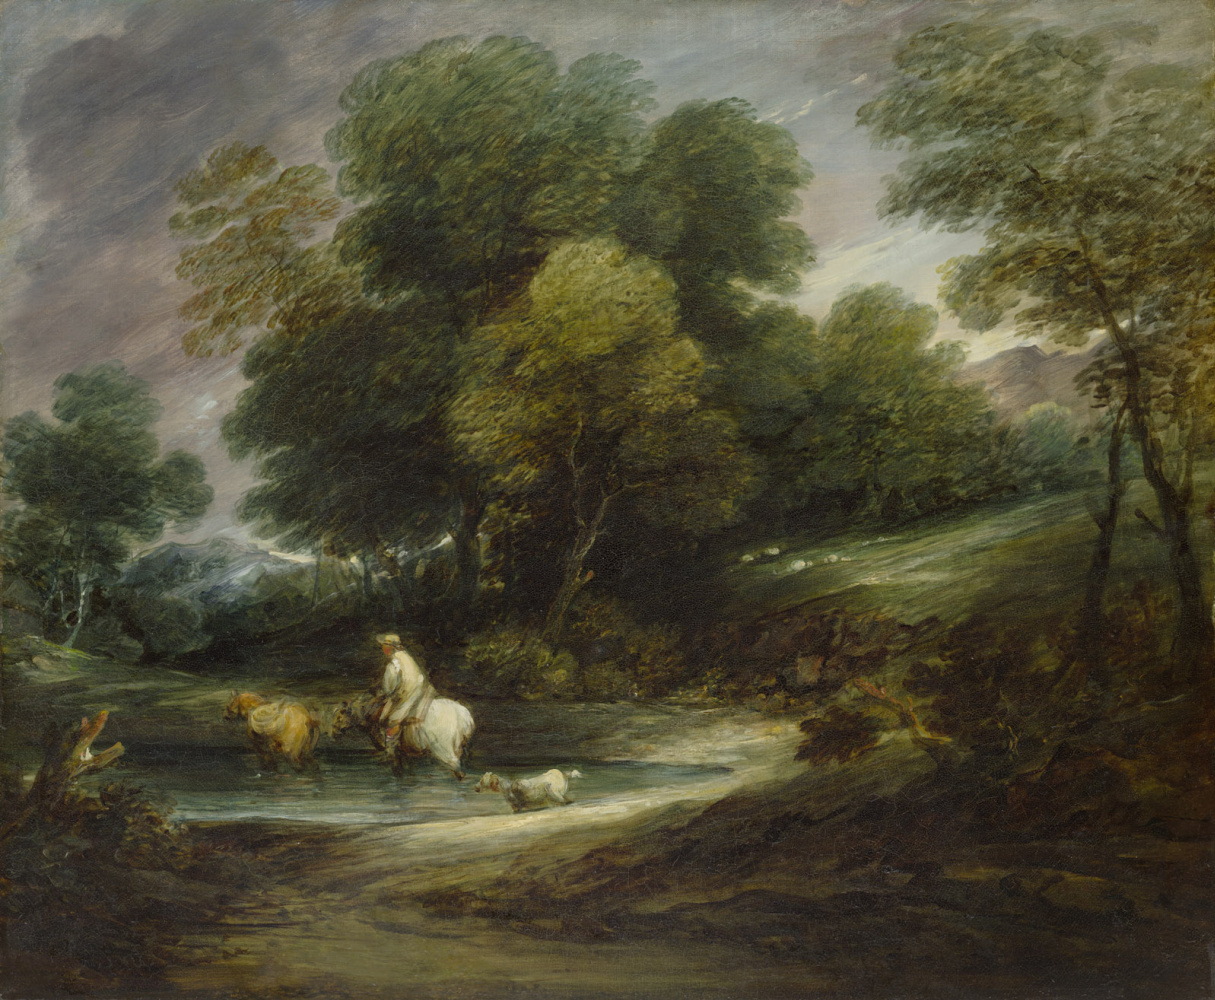 Thomas Gainsborough. Forest landscape. Horseman at a watering hole